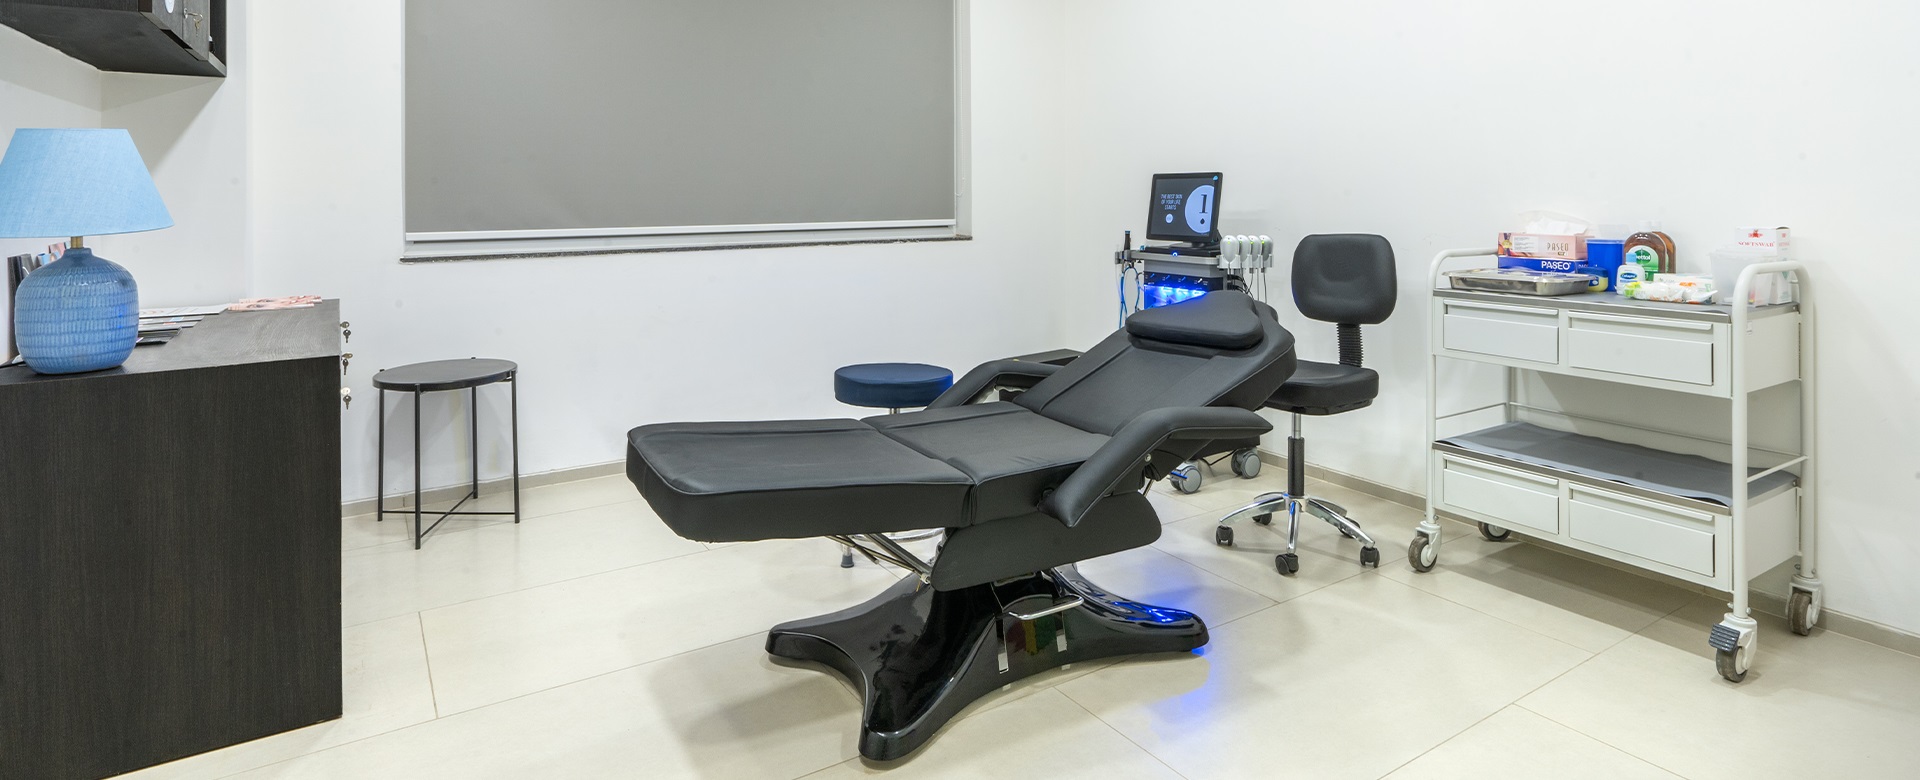 The Face Center - TOP MEDICAL FACILITIES AND MACHINES